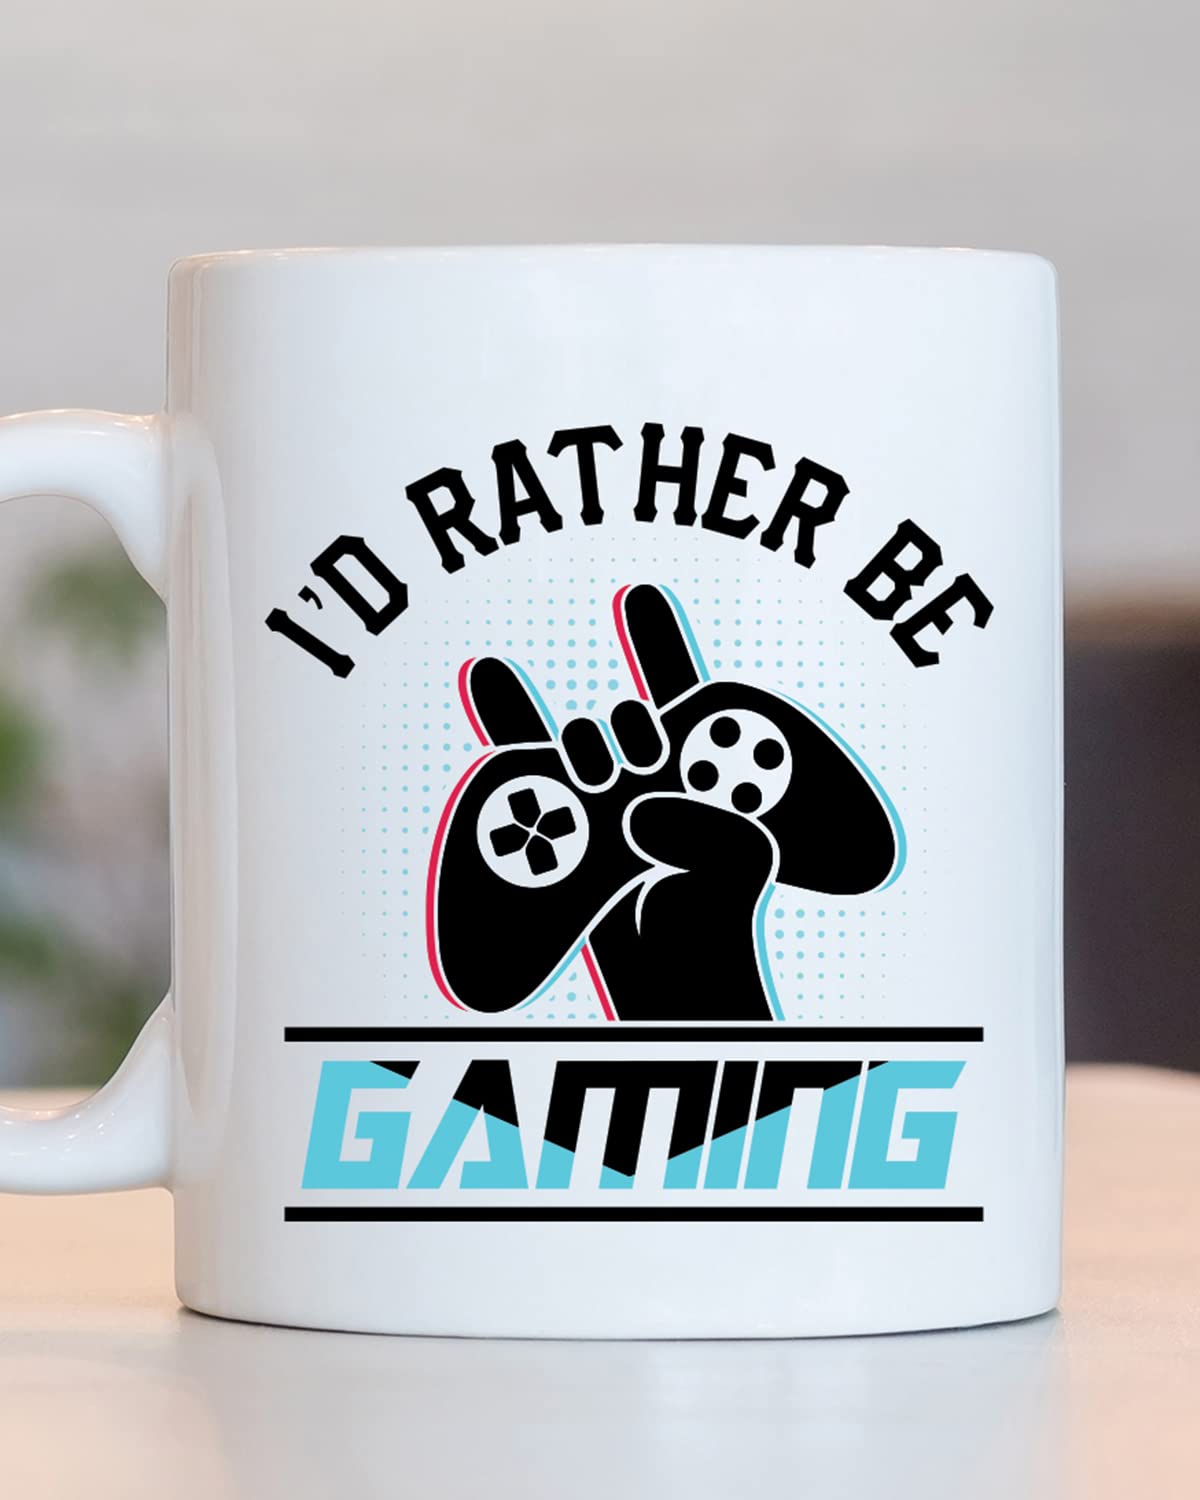 I'D RATHER BE GAMING Coffee Mug - Unique Gifts For Game Lovers, Gamer Mugs, Gifts For Gaming Fans, Gaming Coffee Cup for Husband Boyfriend Birthday, Valentine's Day Gift, Birthday Gift for gamer nerds